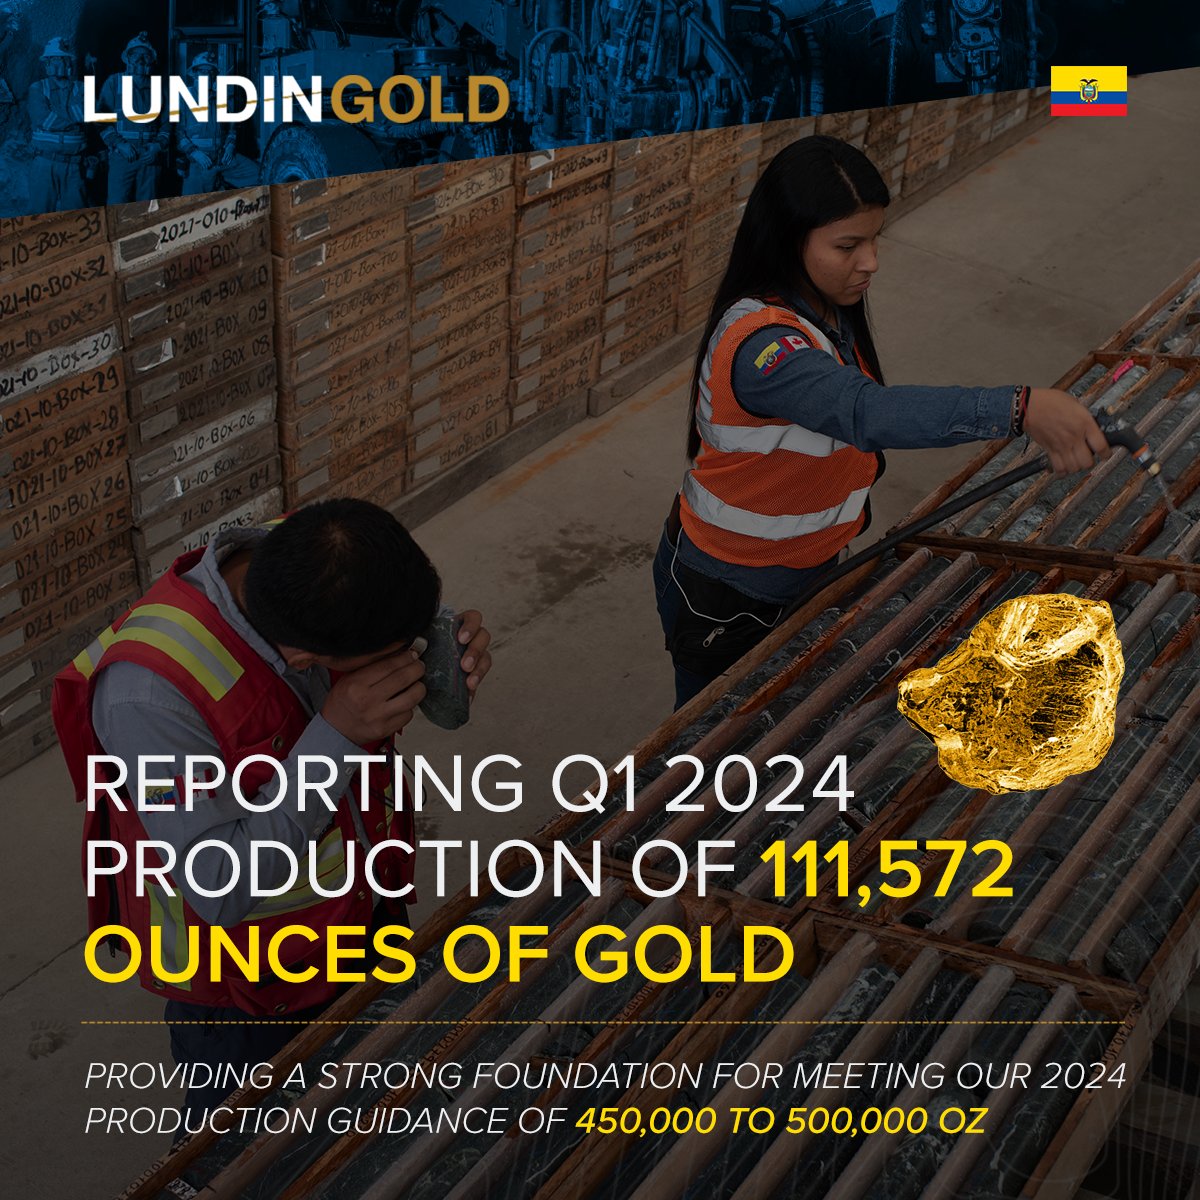 📢 $LUG is pleased to report #gold production of 111,572 oz in Q1 2024, which provides a strong foundation for meeting our guidance of 450,000 to 500,000 oz for 2024. Other highlights include: ➡️ 413,596 tonnes processed at an average throughput rate of 4,545 tonnes per day ➡️…